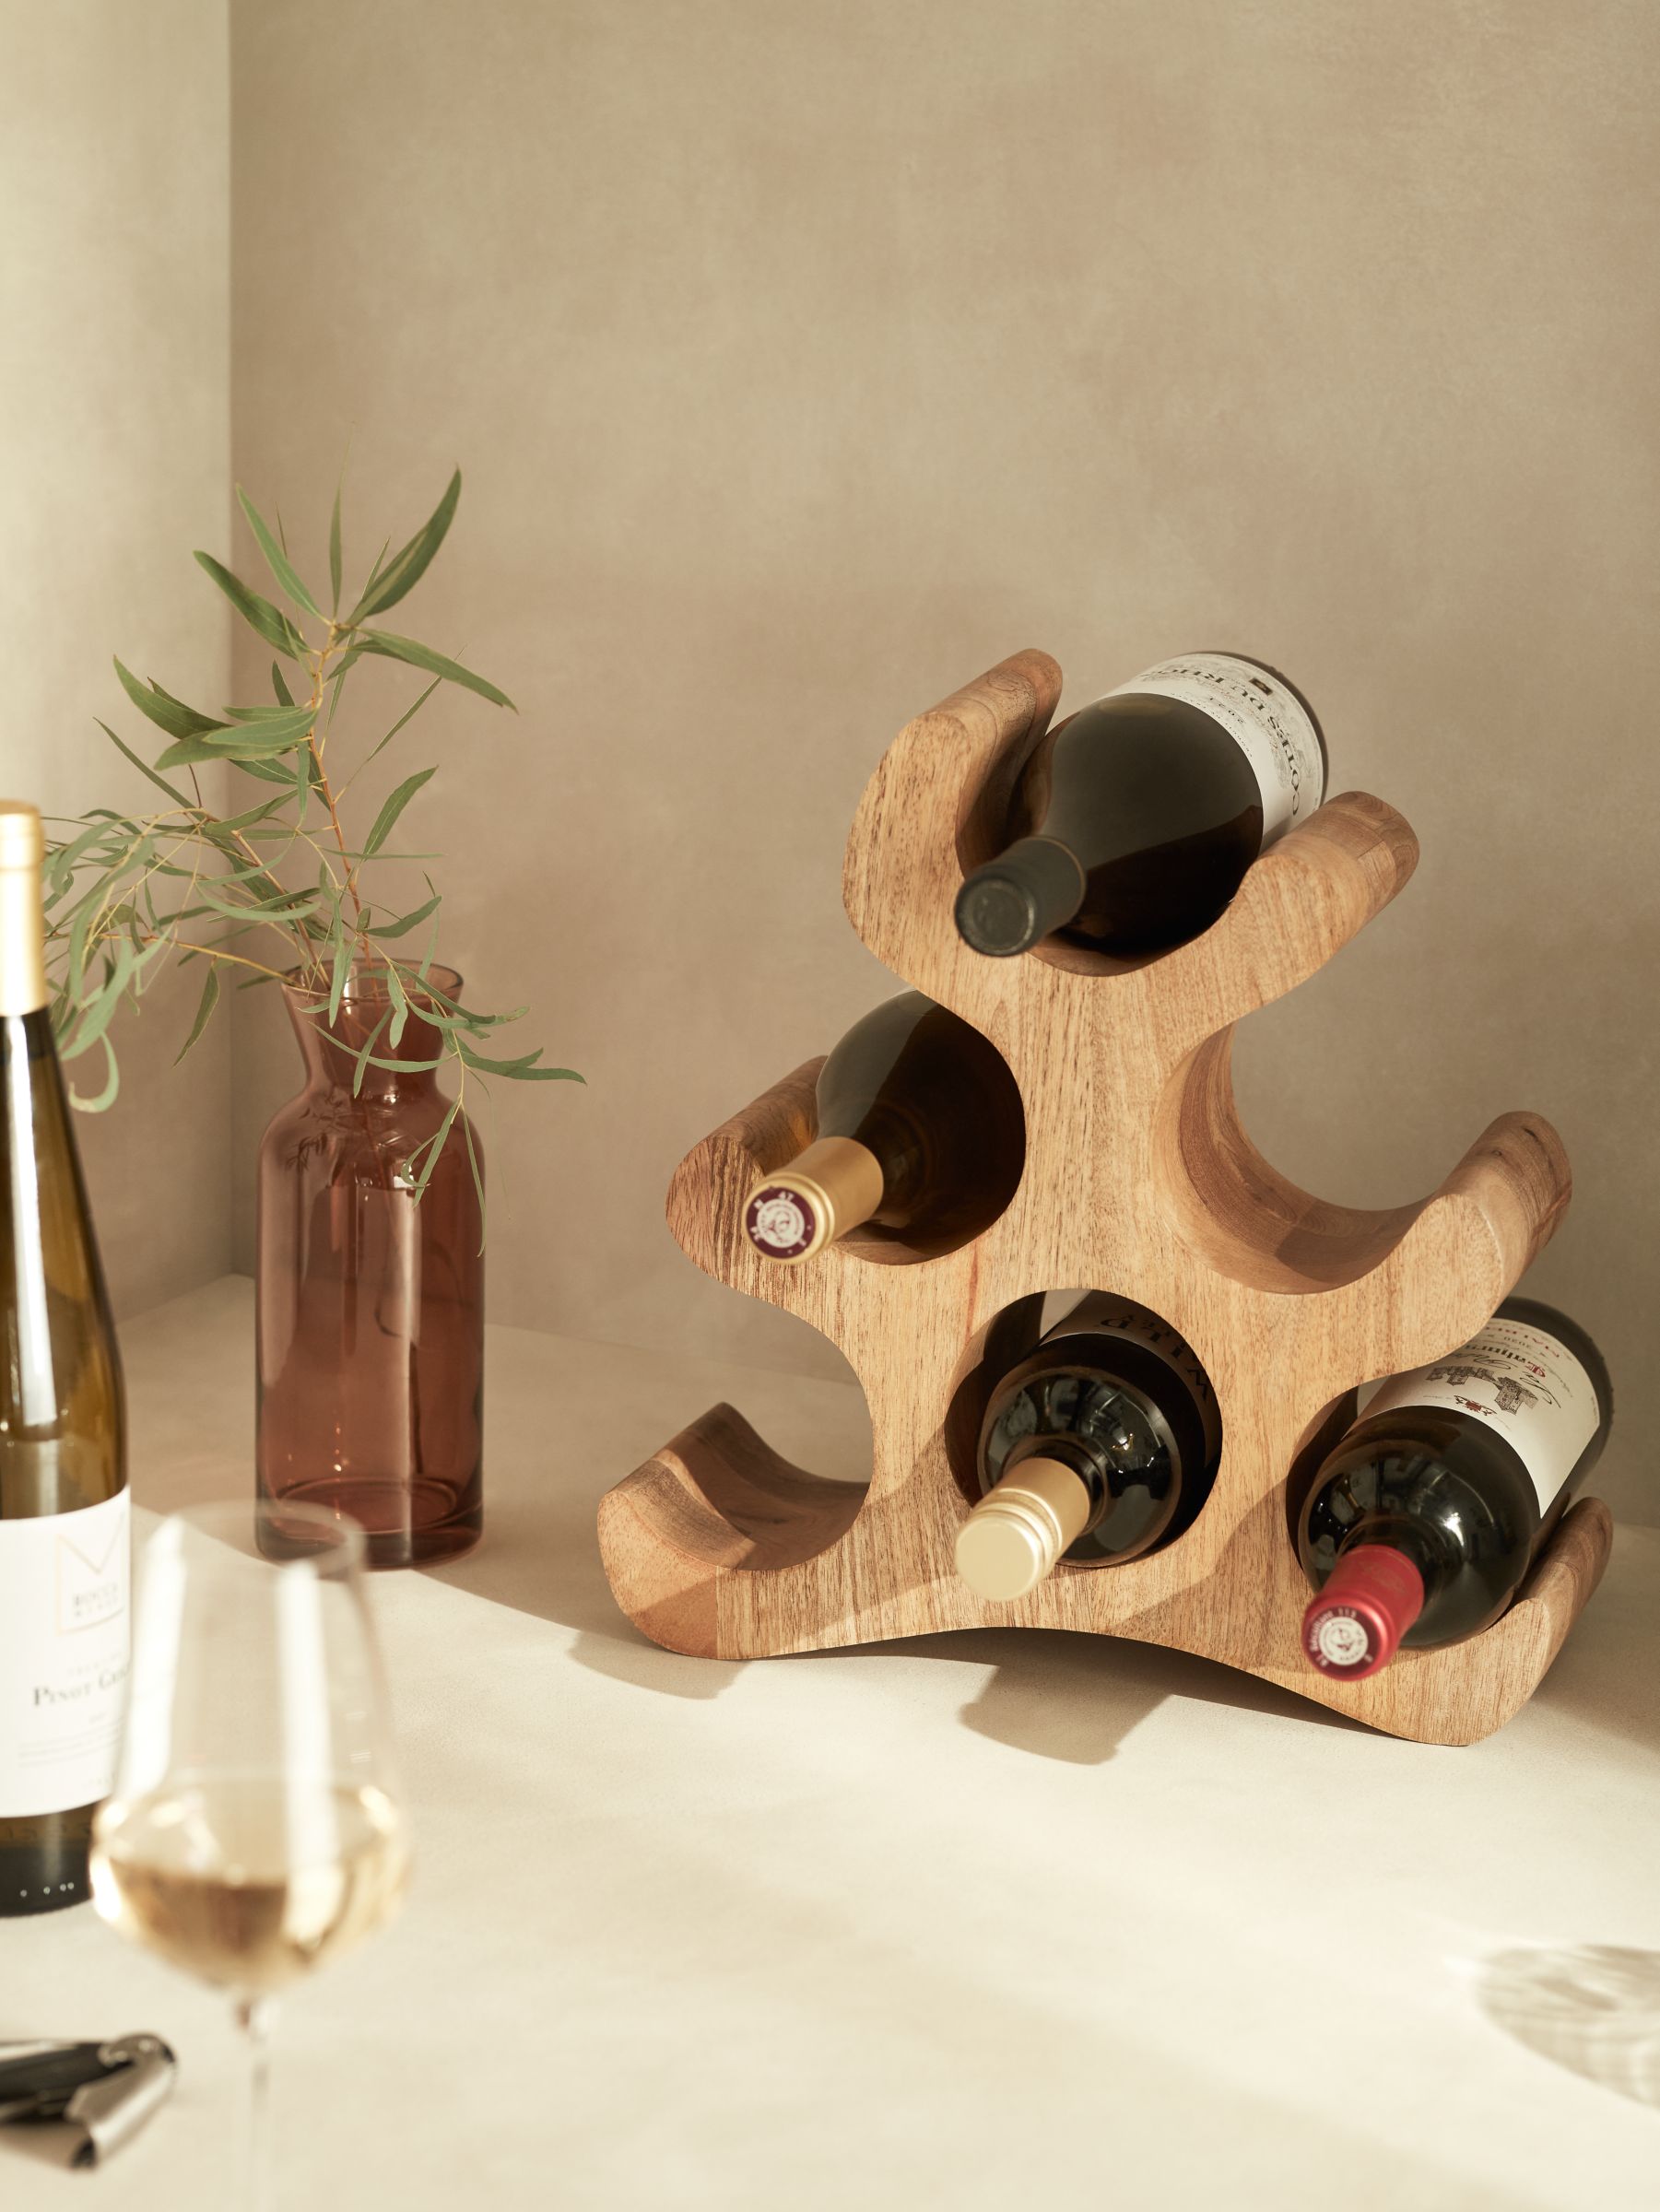 Wine Barrel Stave Glass and Bottle Holders – Wine Country Craft